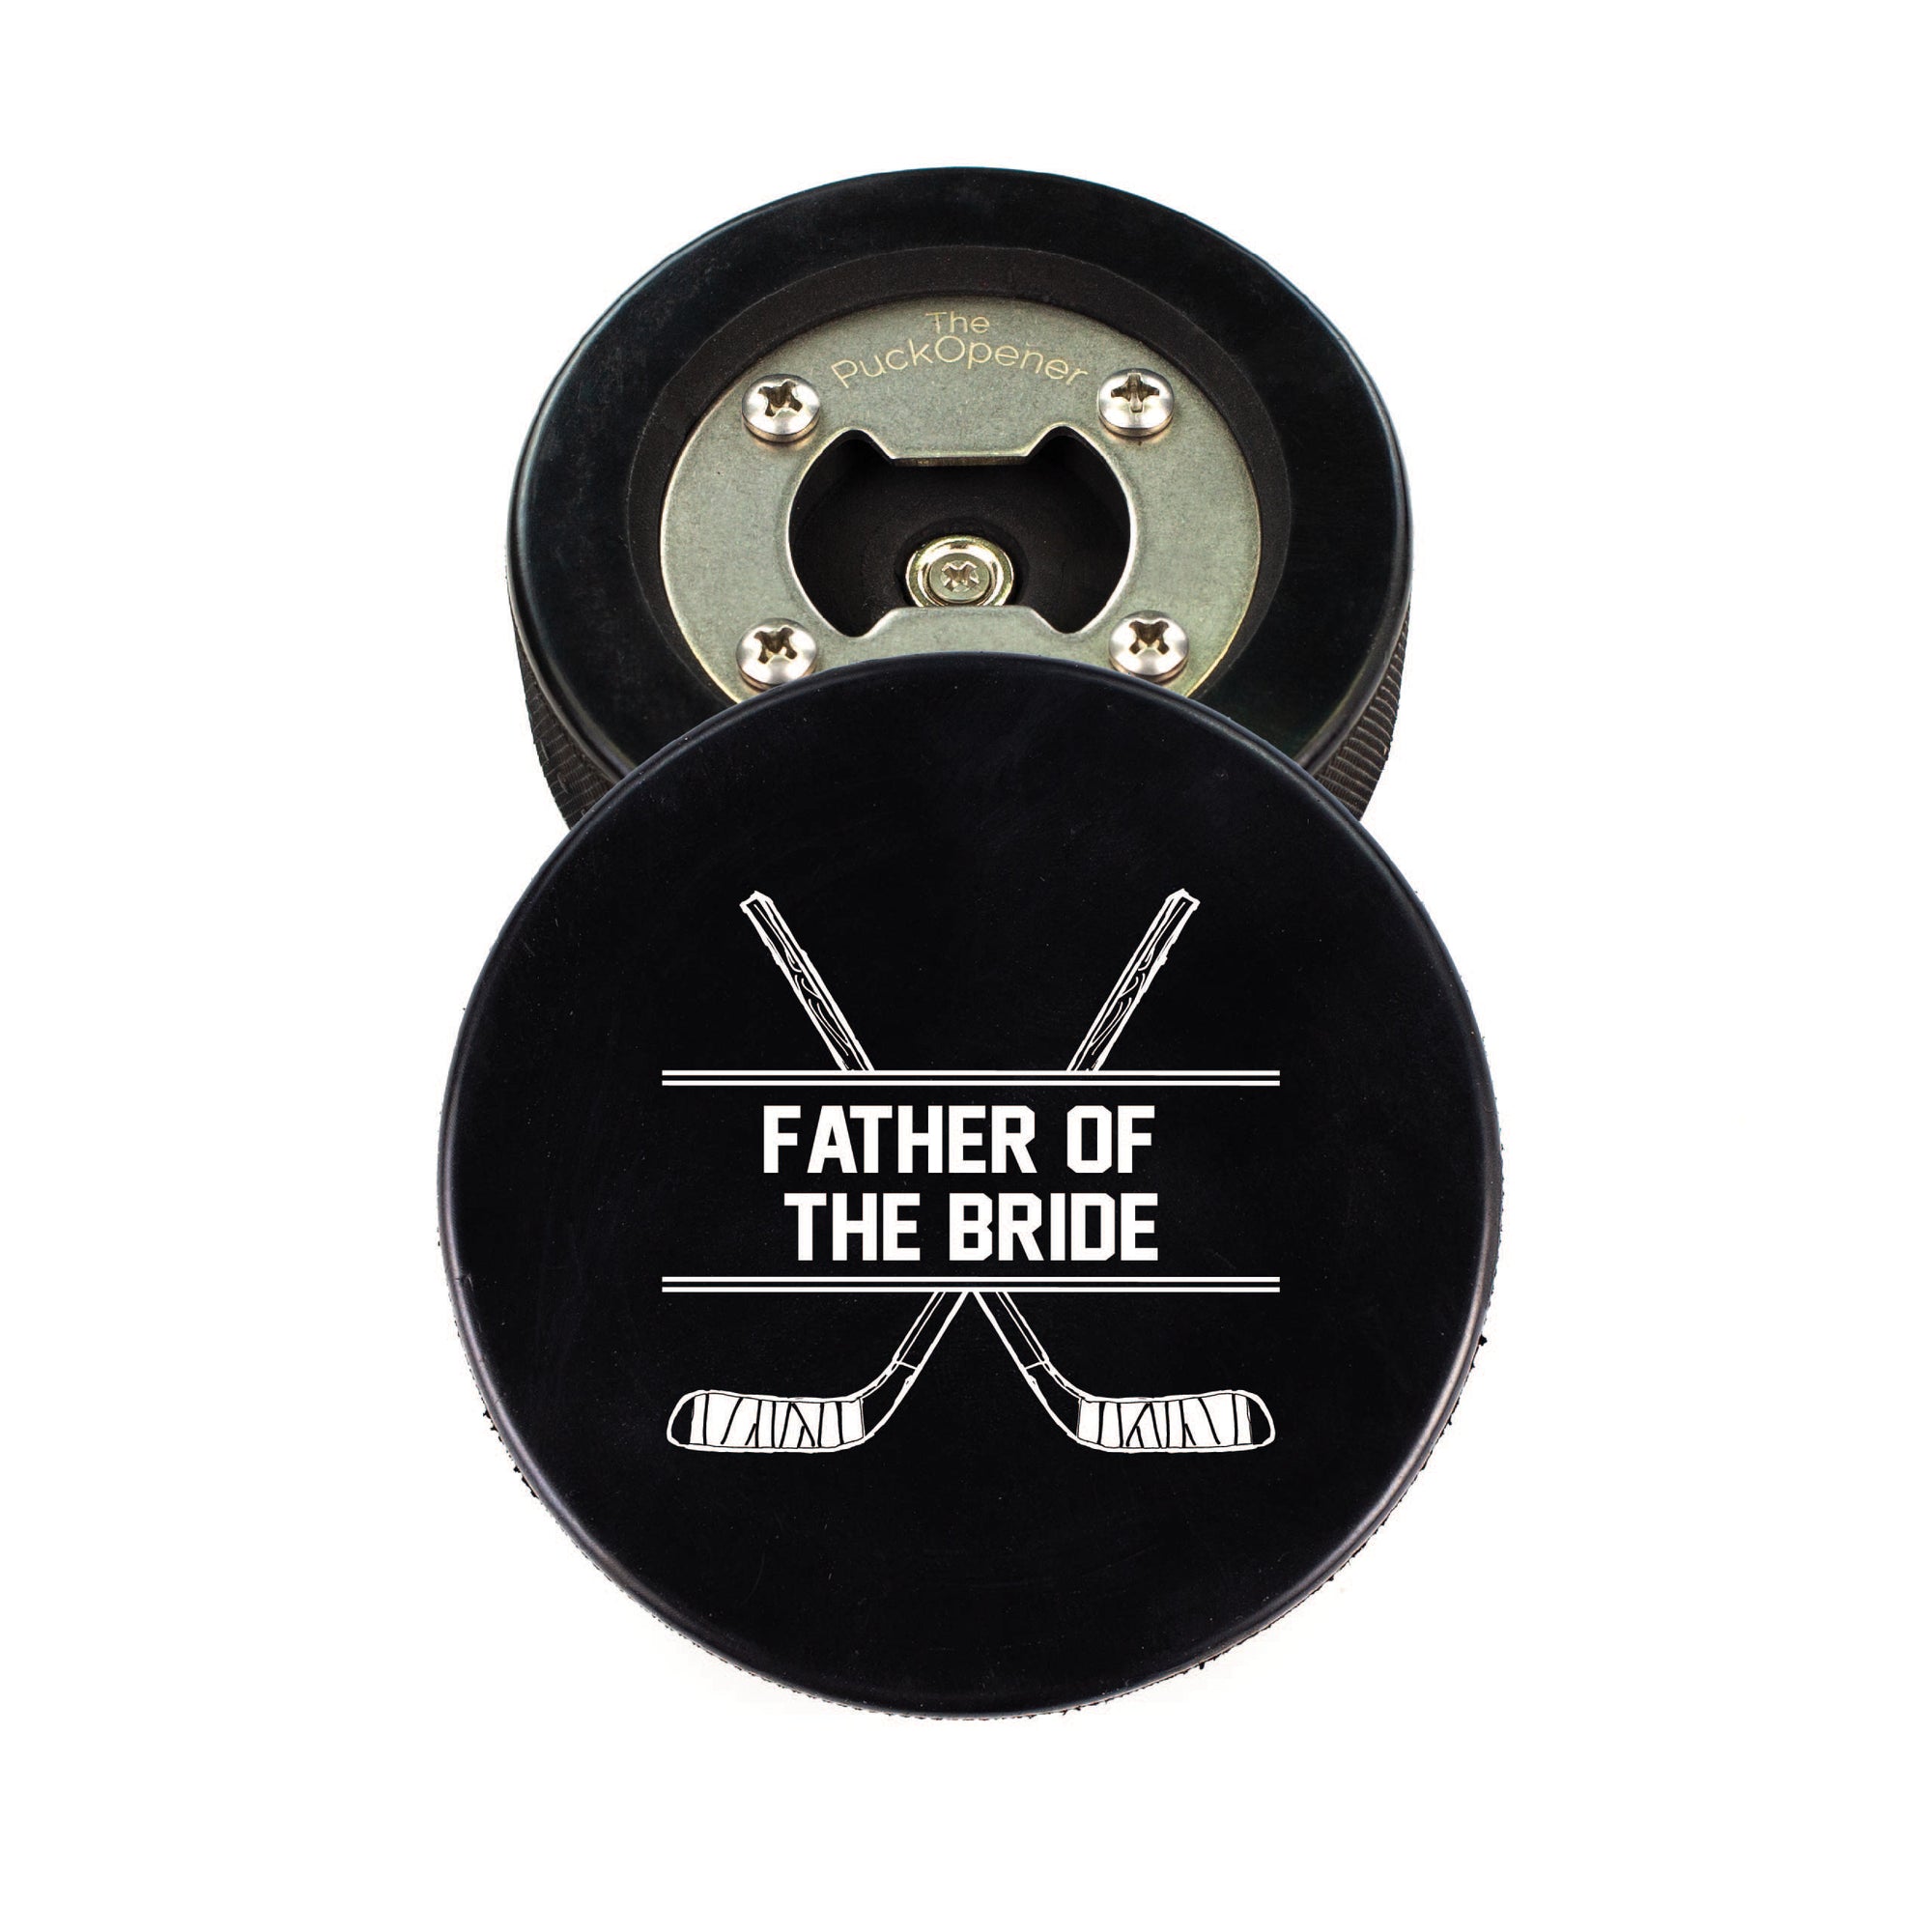 Hockey Puck Bottle Opener with Father of the Bride Hockey Stick Design